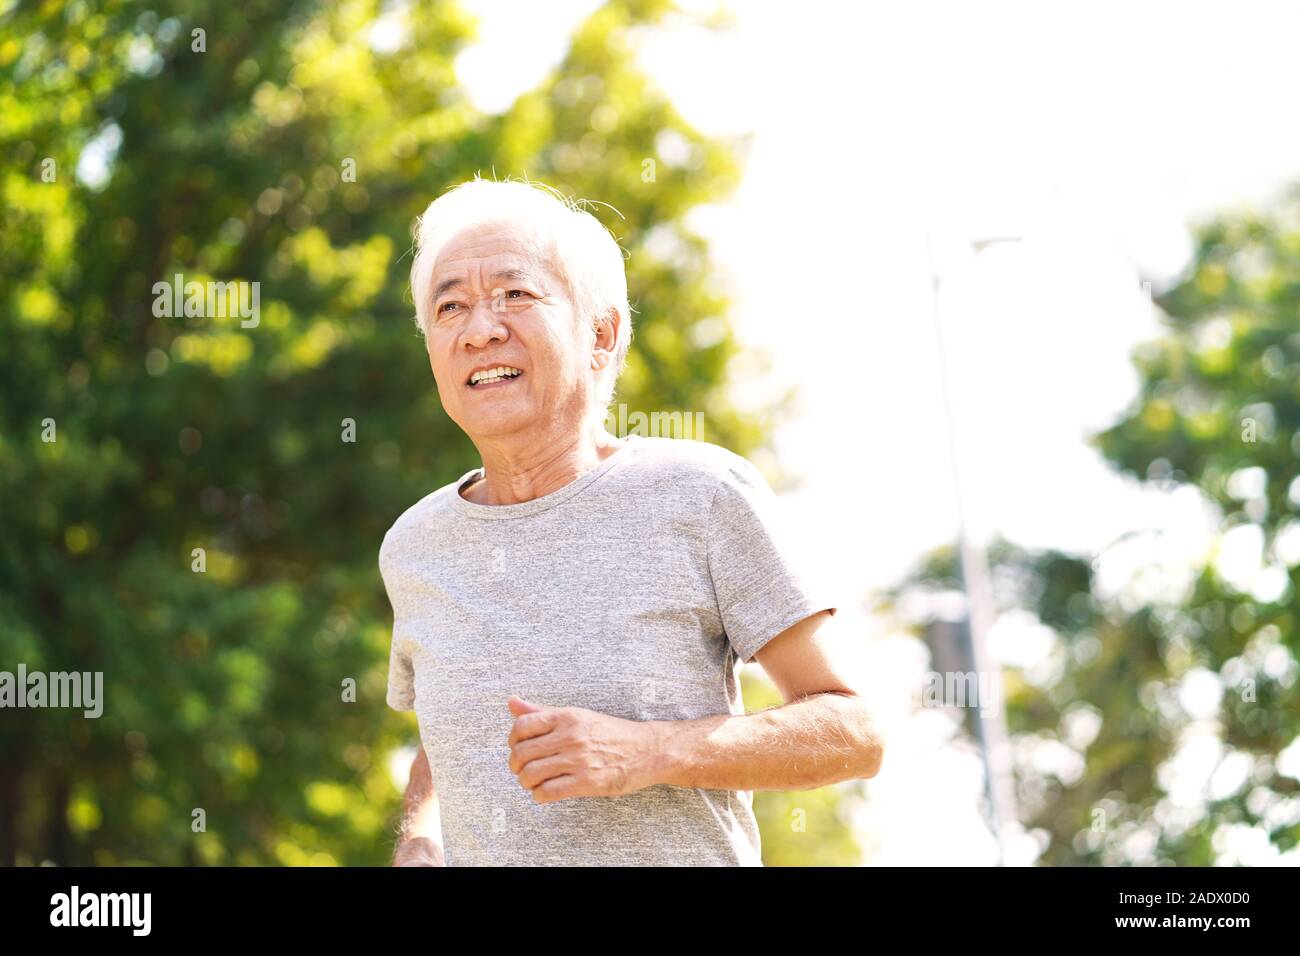 Healthy Senior asian man exercising outdoors Banque D'Images